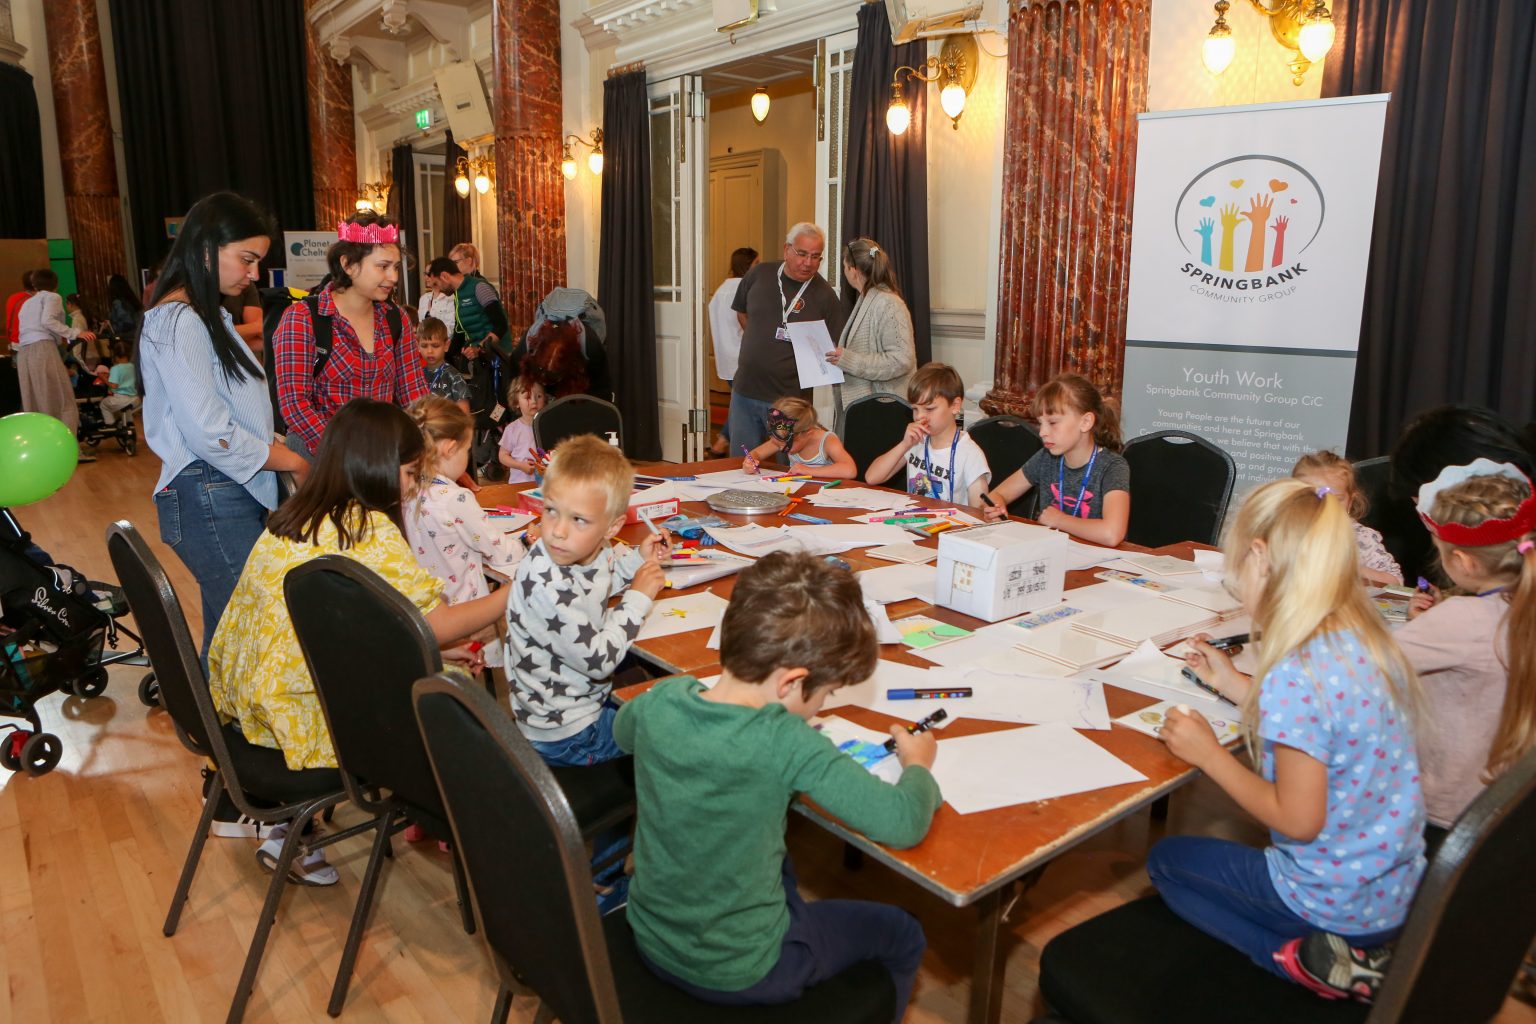 Cheltenham Childrens Festival 2022, No Child Left Behind. Held at Cheltenham Town Hall and the Brewery Quarter, 28.05.2022. Photos by Anna Lythgoe for Cheltenham Borough Council.